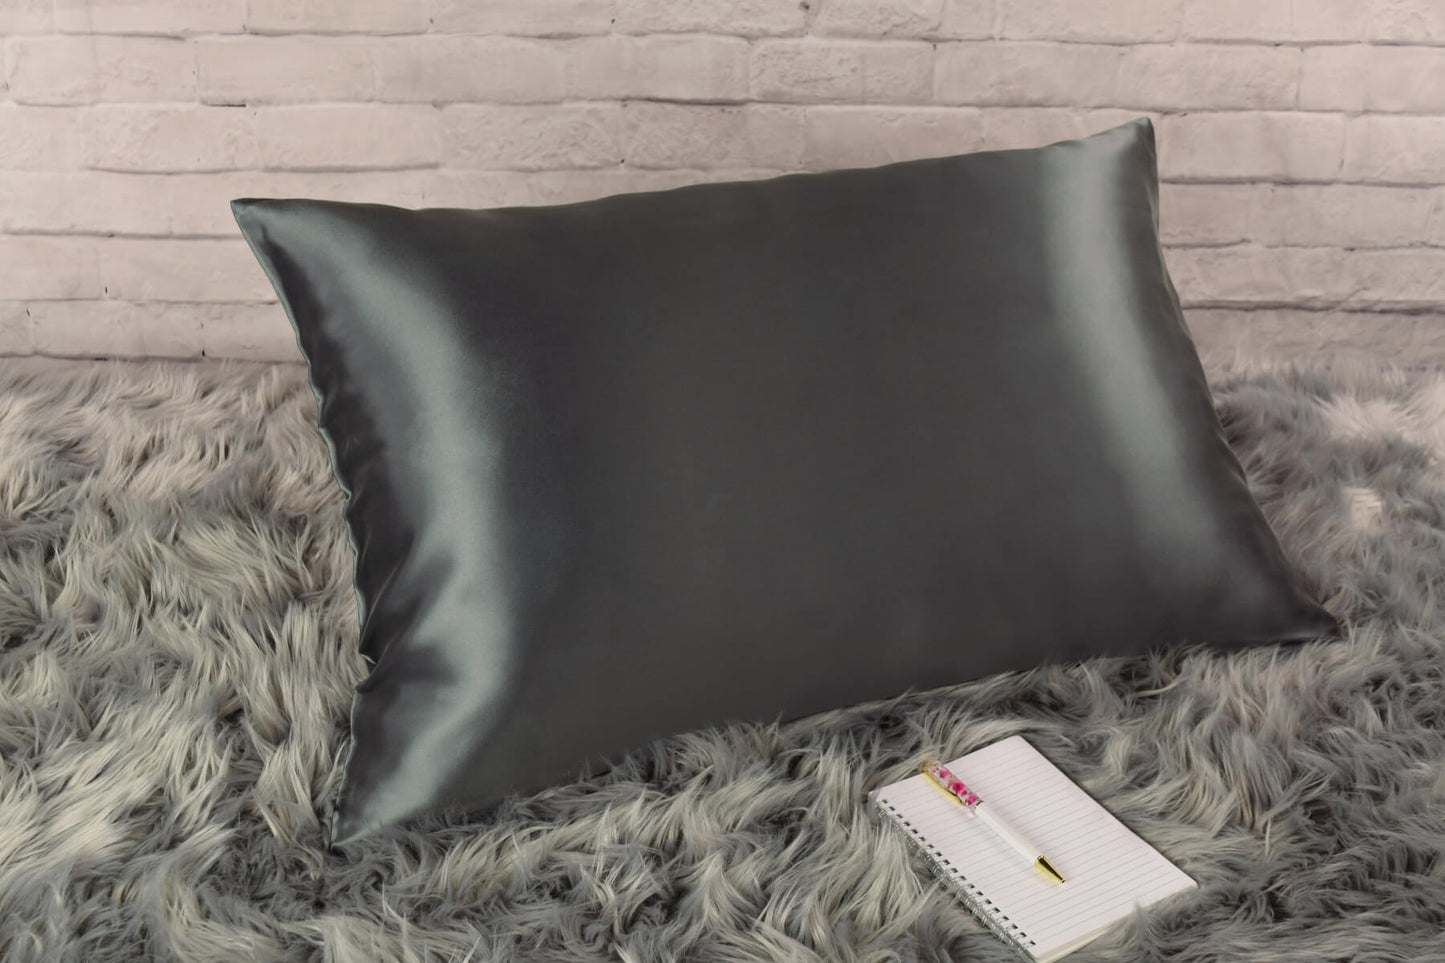 Celestial Silk 25 momme charcoal gray silk pillowcase on faux fur rug with notebook and pretty pen